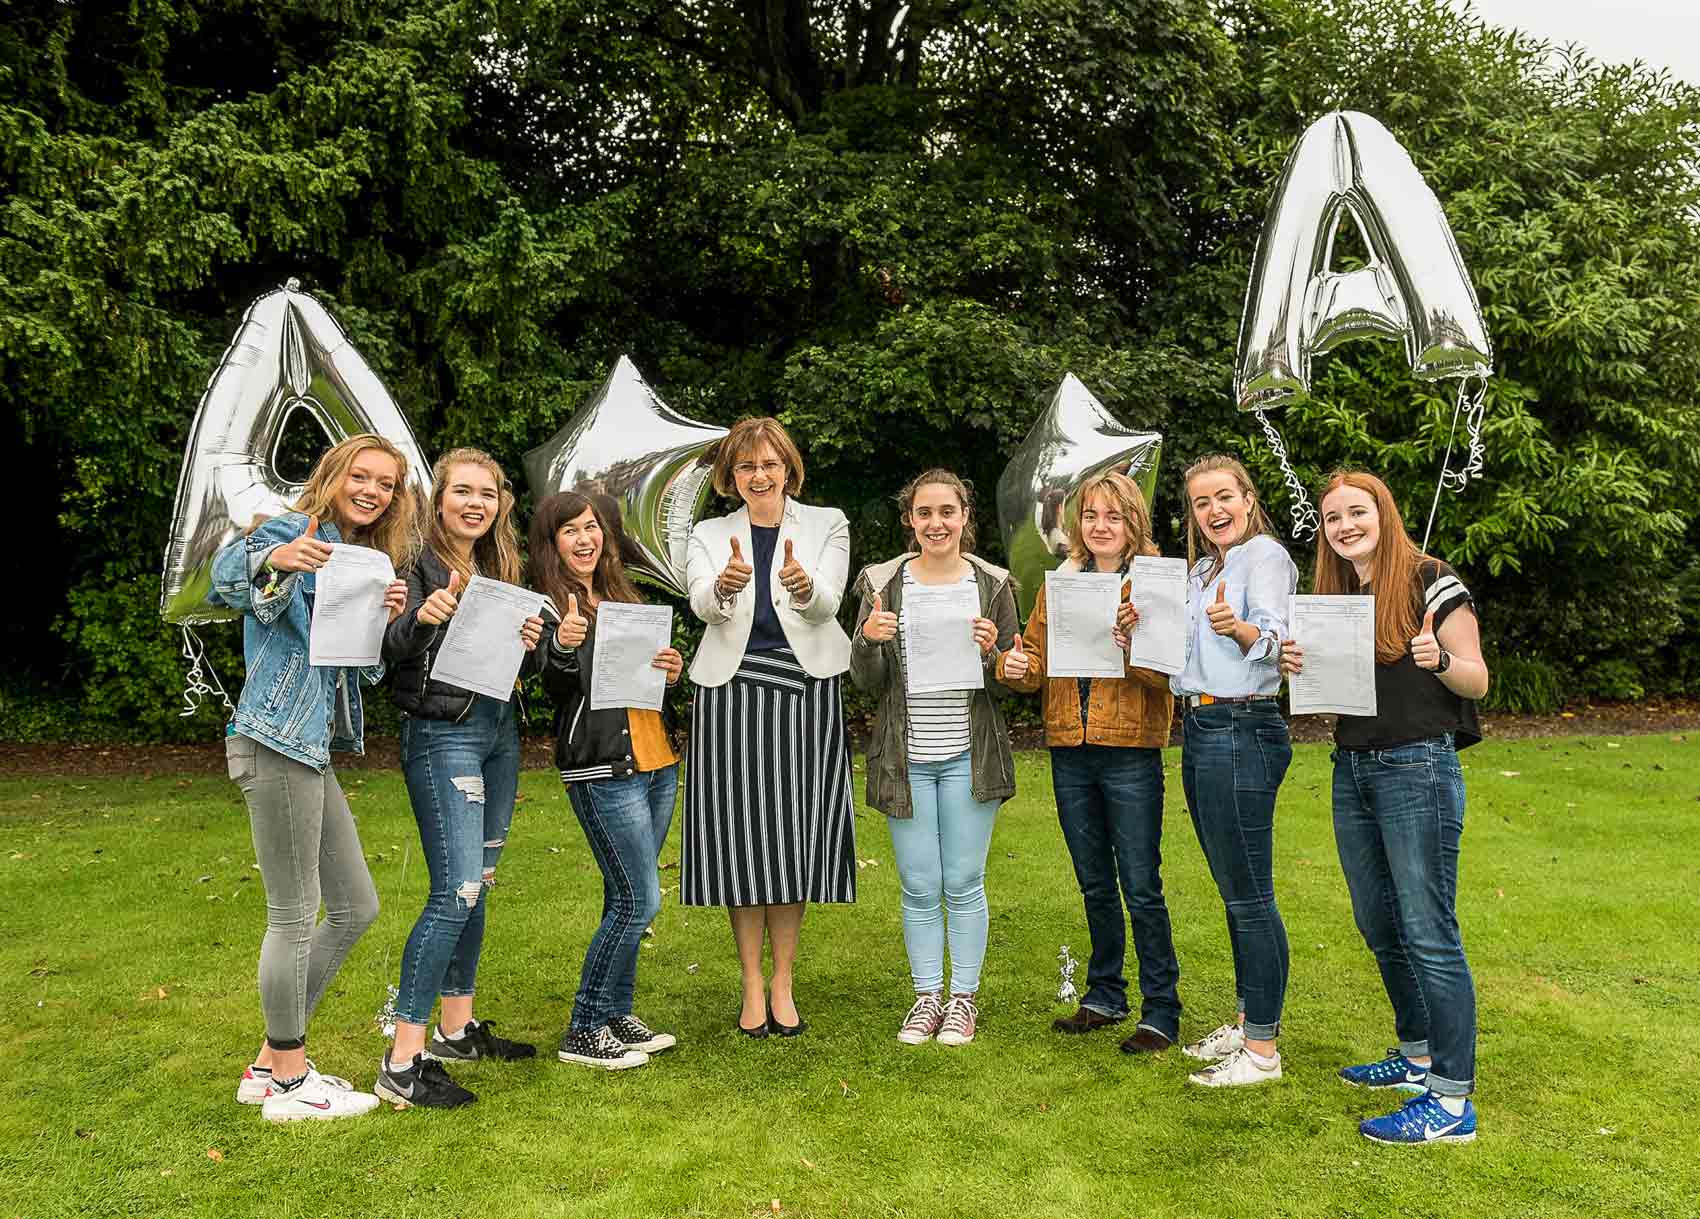 Sylvia Brett, Principal of Harrogate Ladies’ College joins pupils to celebrate an outstanding set of GCSE level results